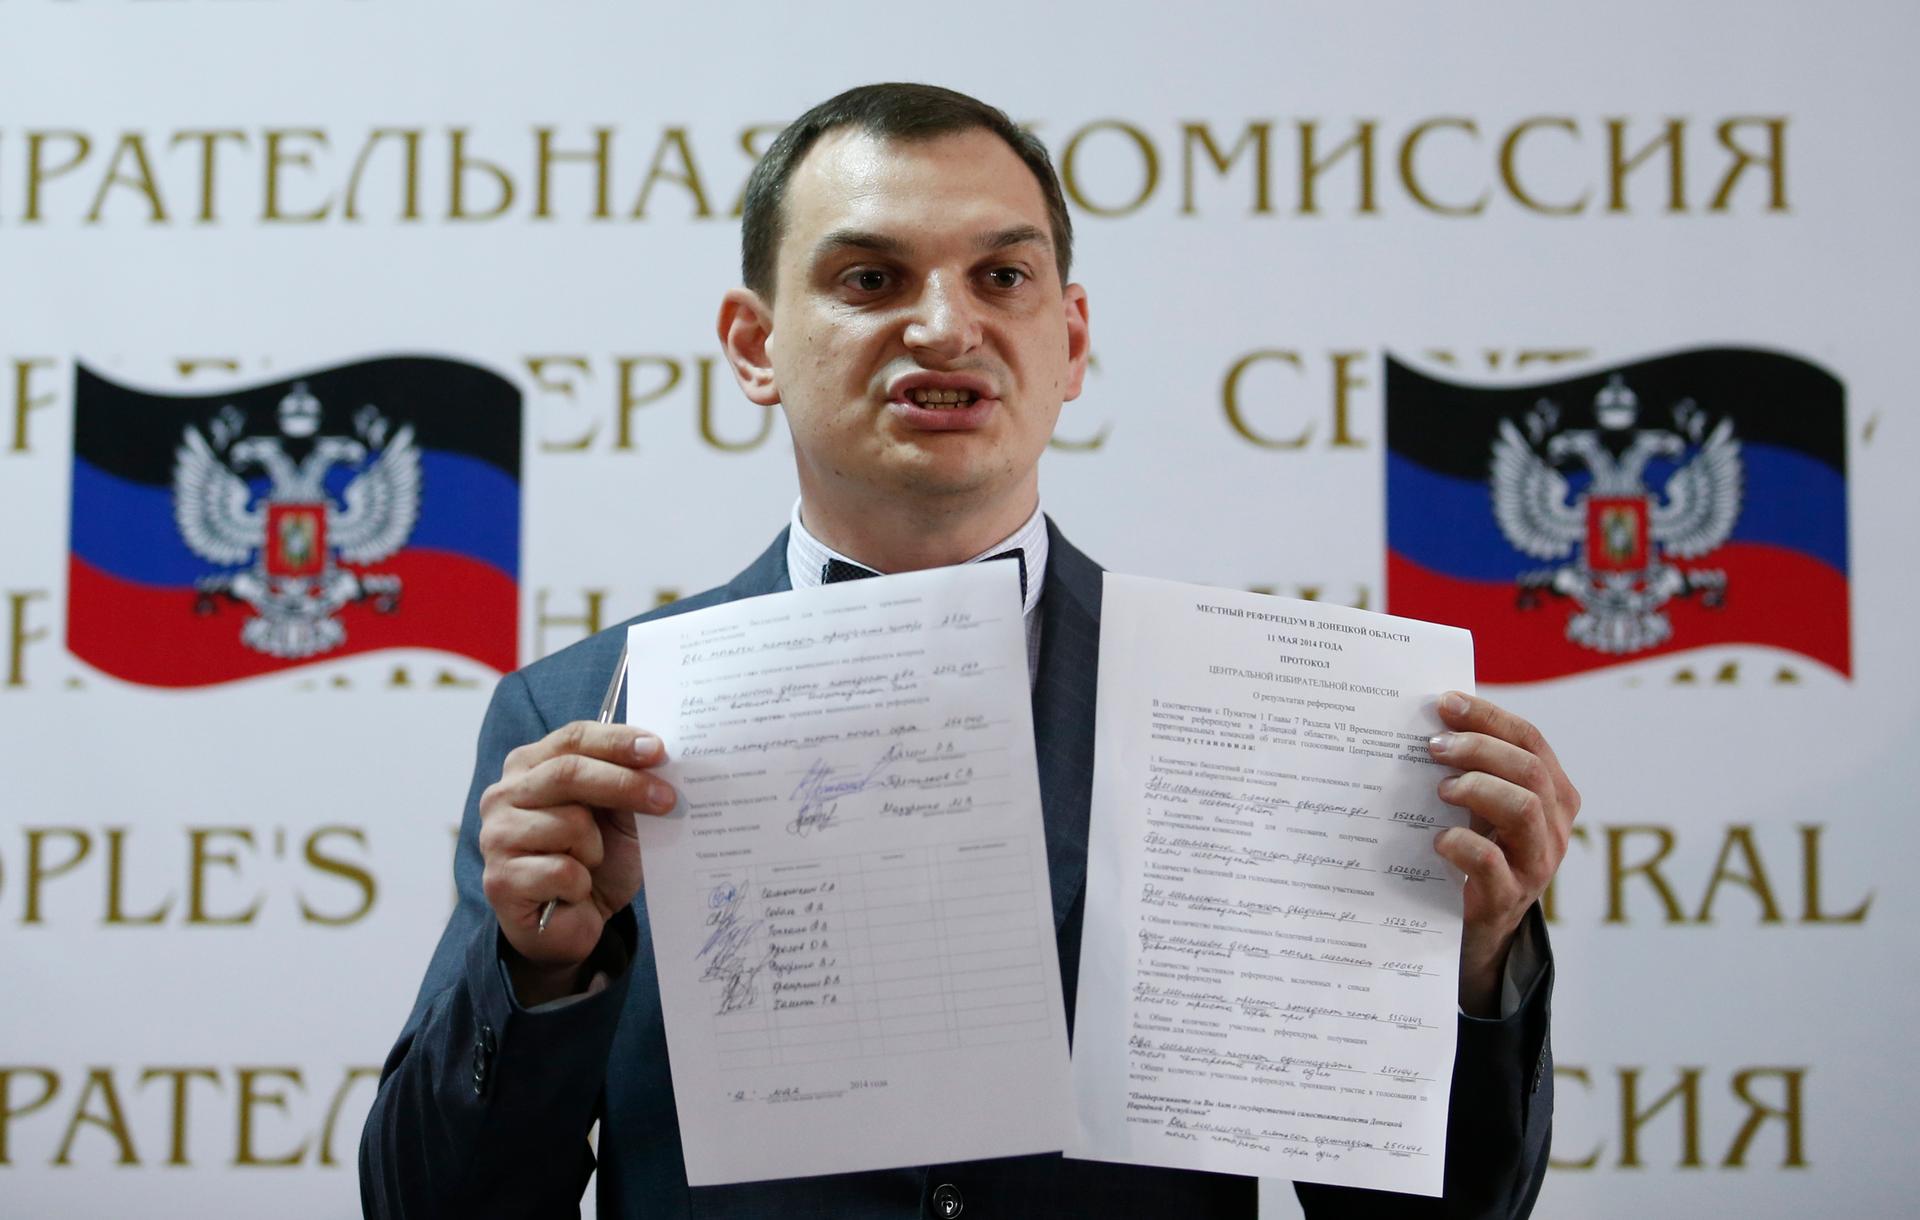 Roman Lyagin, head of the electoral commission in Donetsk, holds up the results of the referendum on the status of the province, during a news conference Monday. Pro-Russian separatists say they received overwhelming support.